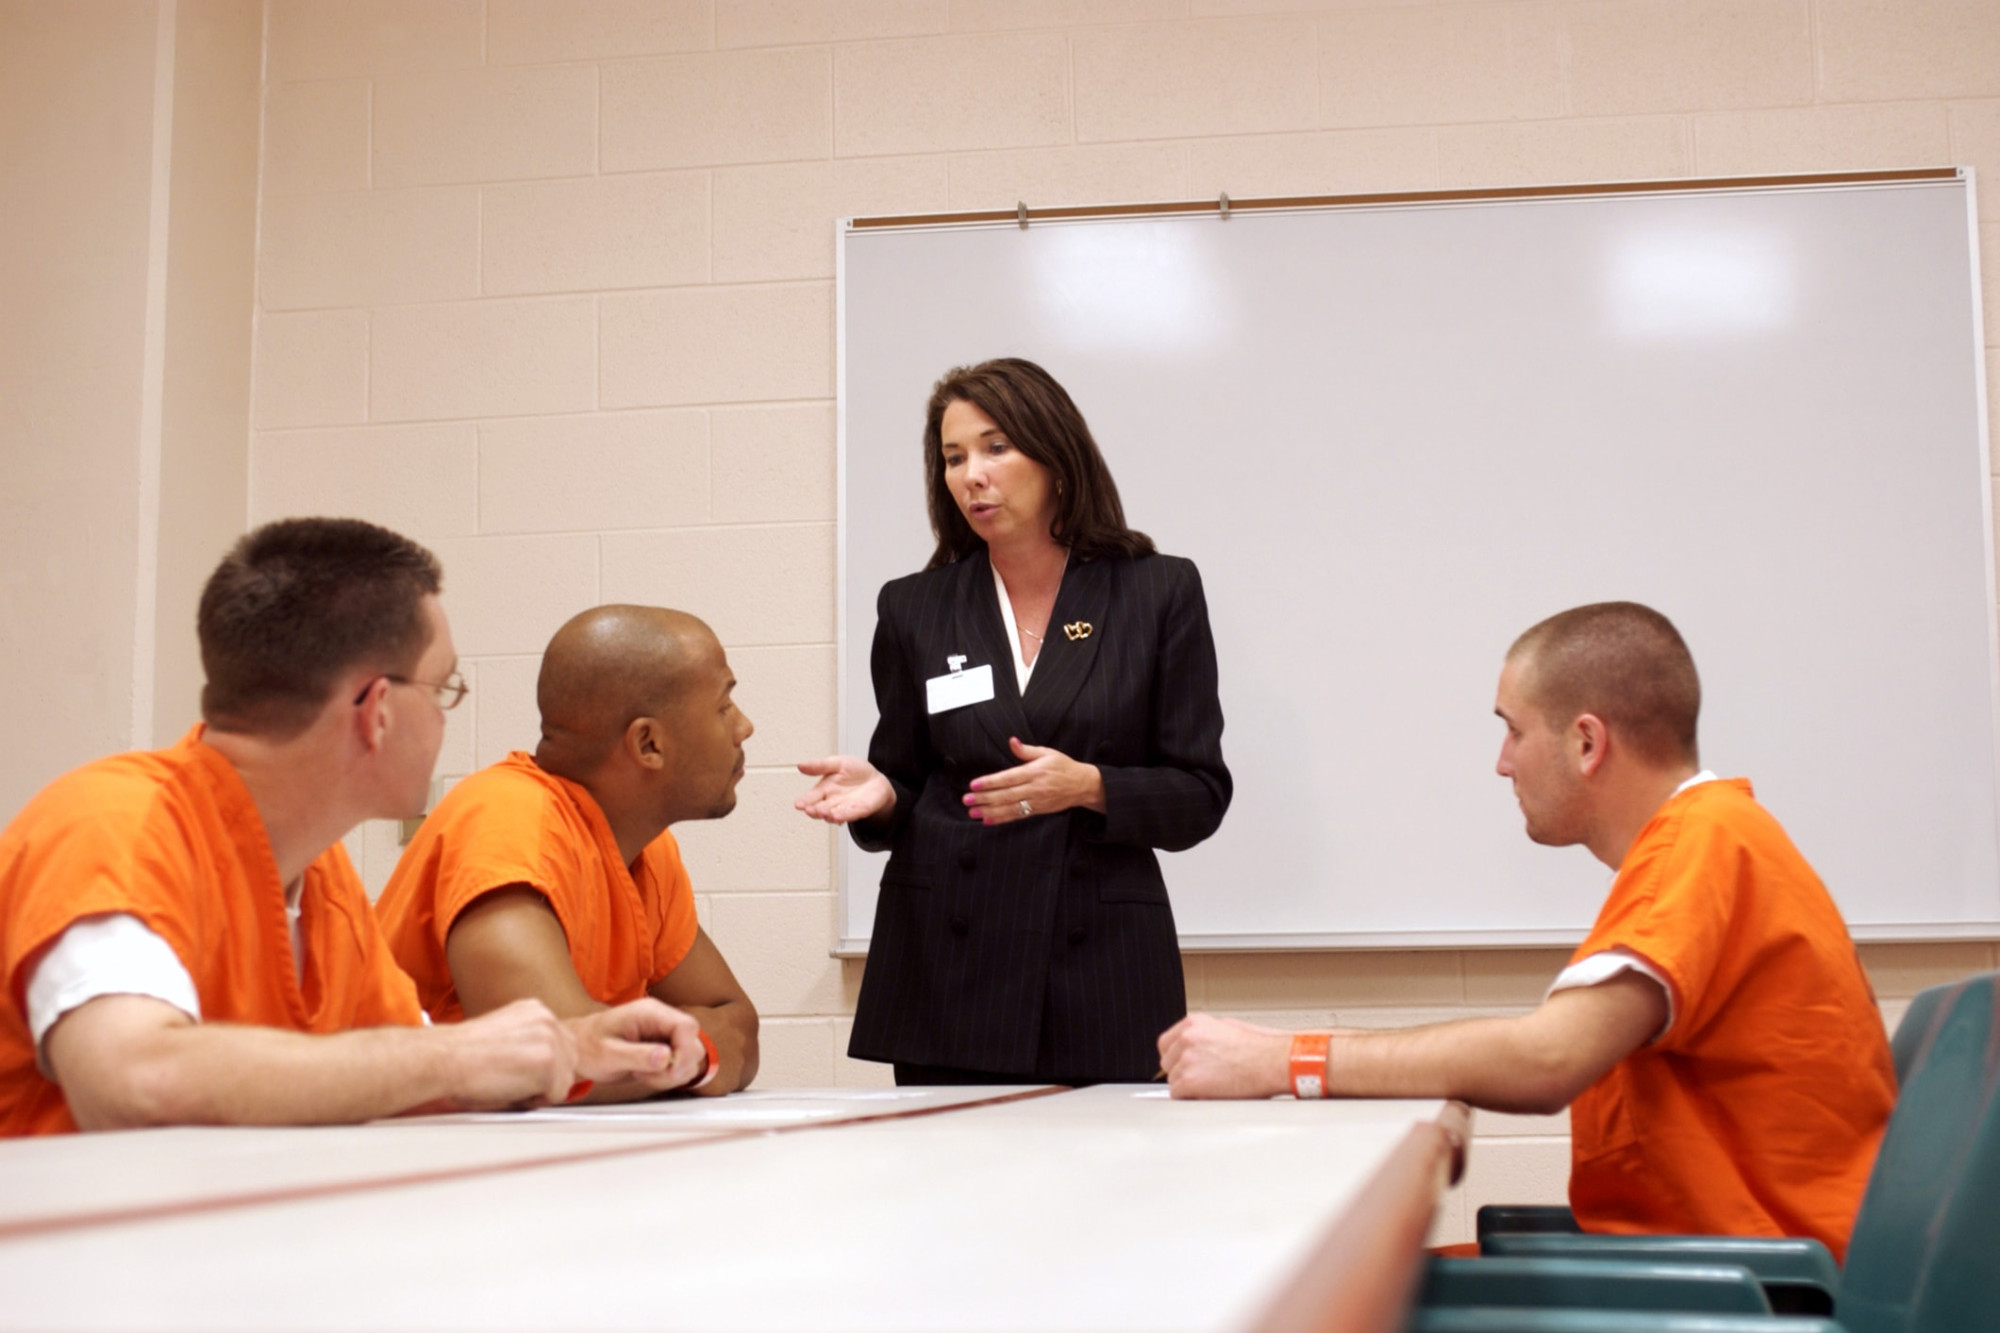 This photo shows four individuals sitting in a room in a correctional facility. An individual dressed in professional clothes is wearing a name tag, standing up and talking with three individuals sitting down at a table wearing orange uniforms. The professional is a social worker) and is counseling the individuals sitting down.